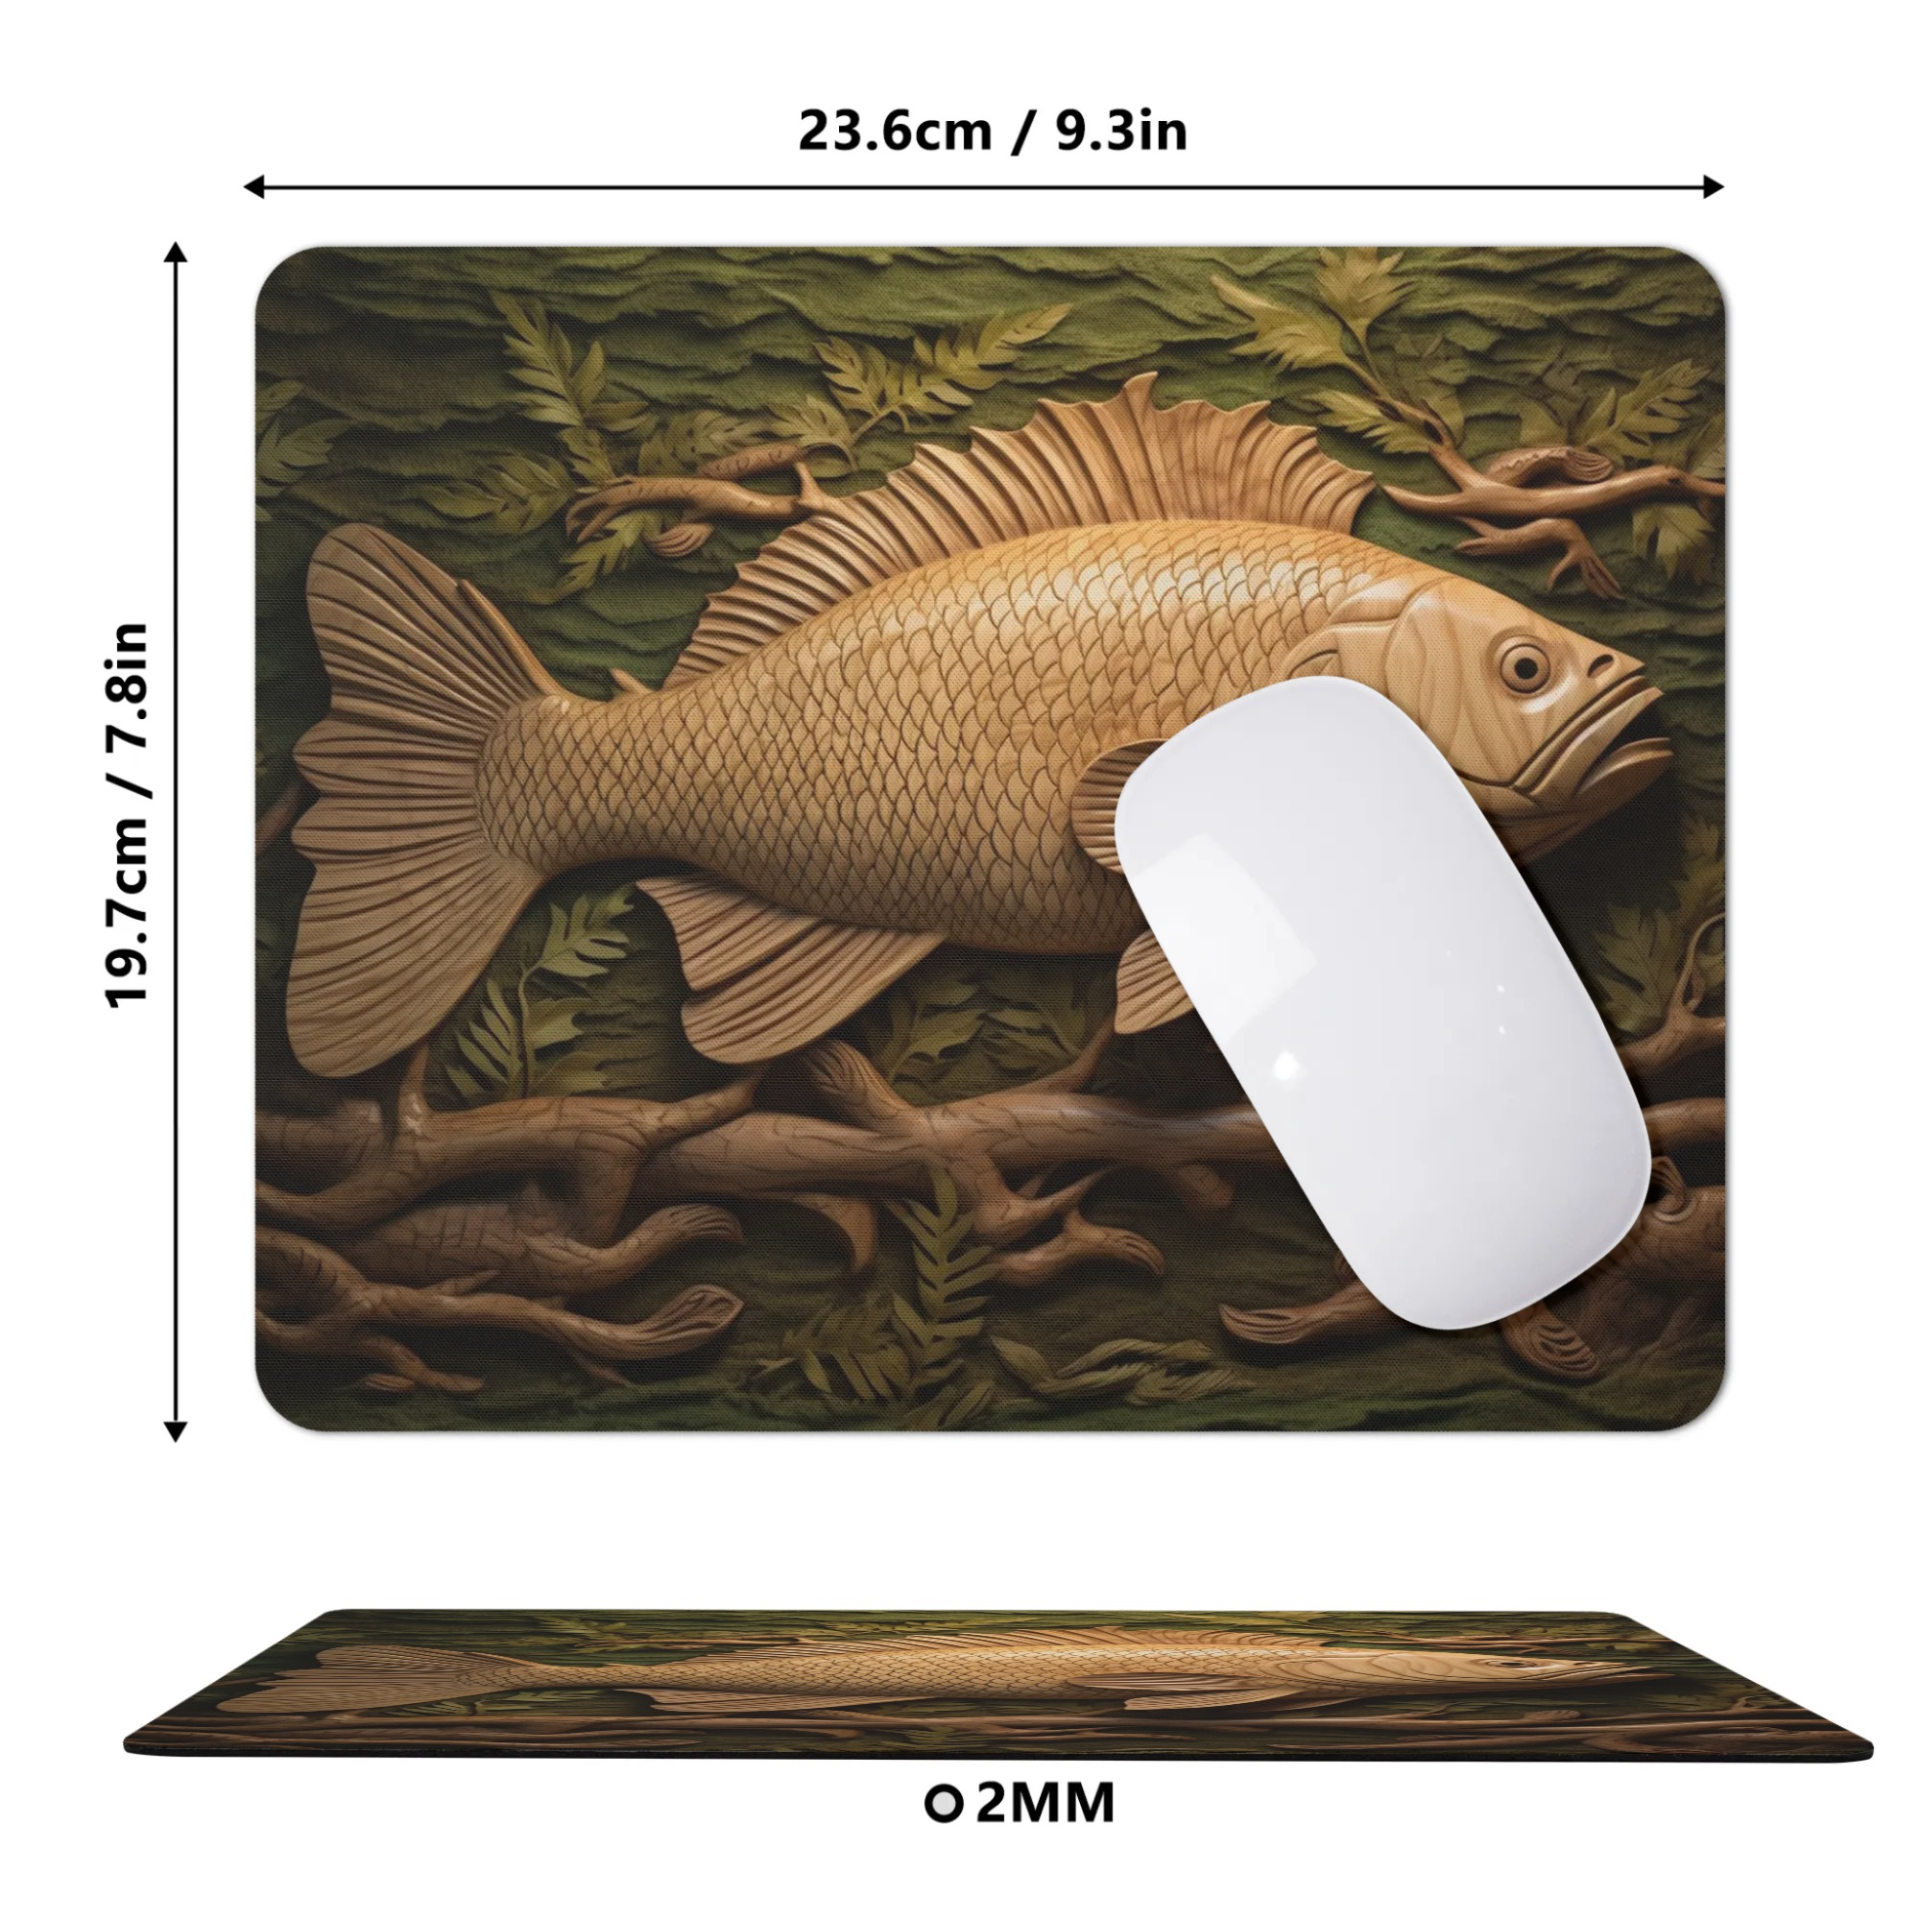 Square Rubber Mouse Mat Pad with Fish Print - High Quality, Anti-Slip, Washable, Goodies N Stuff